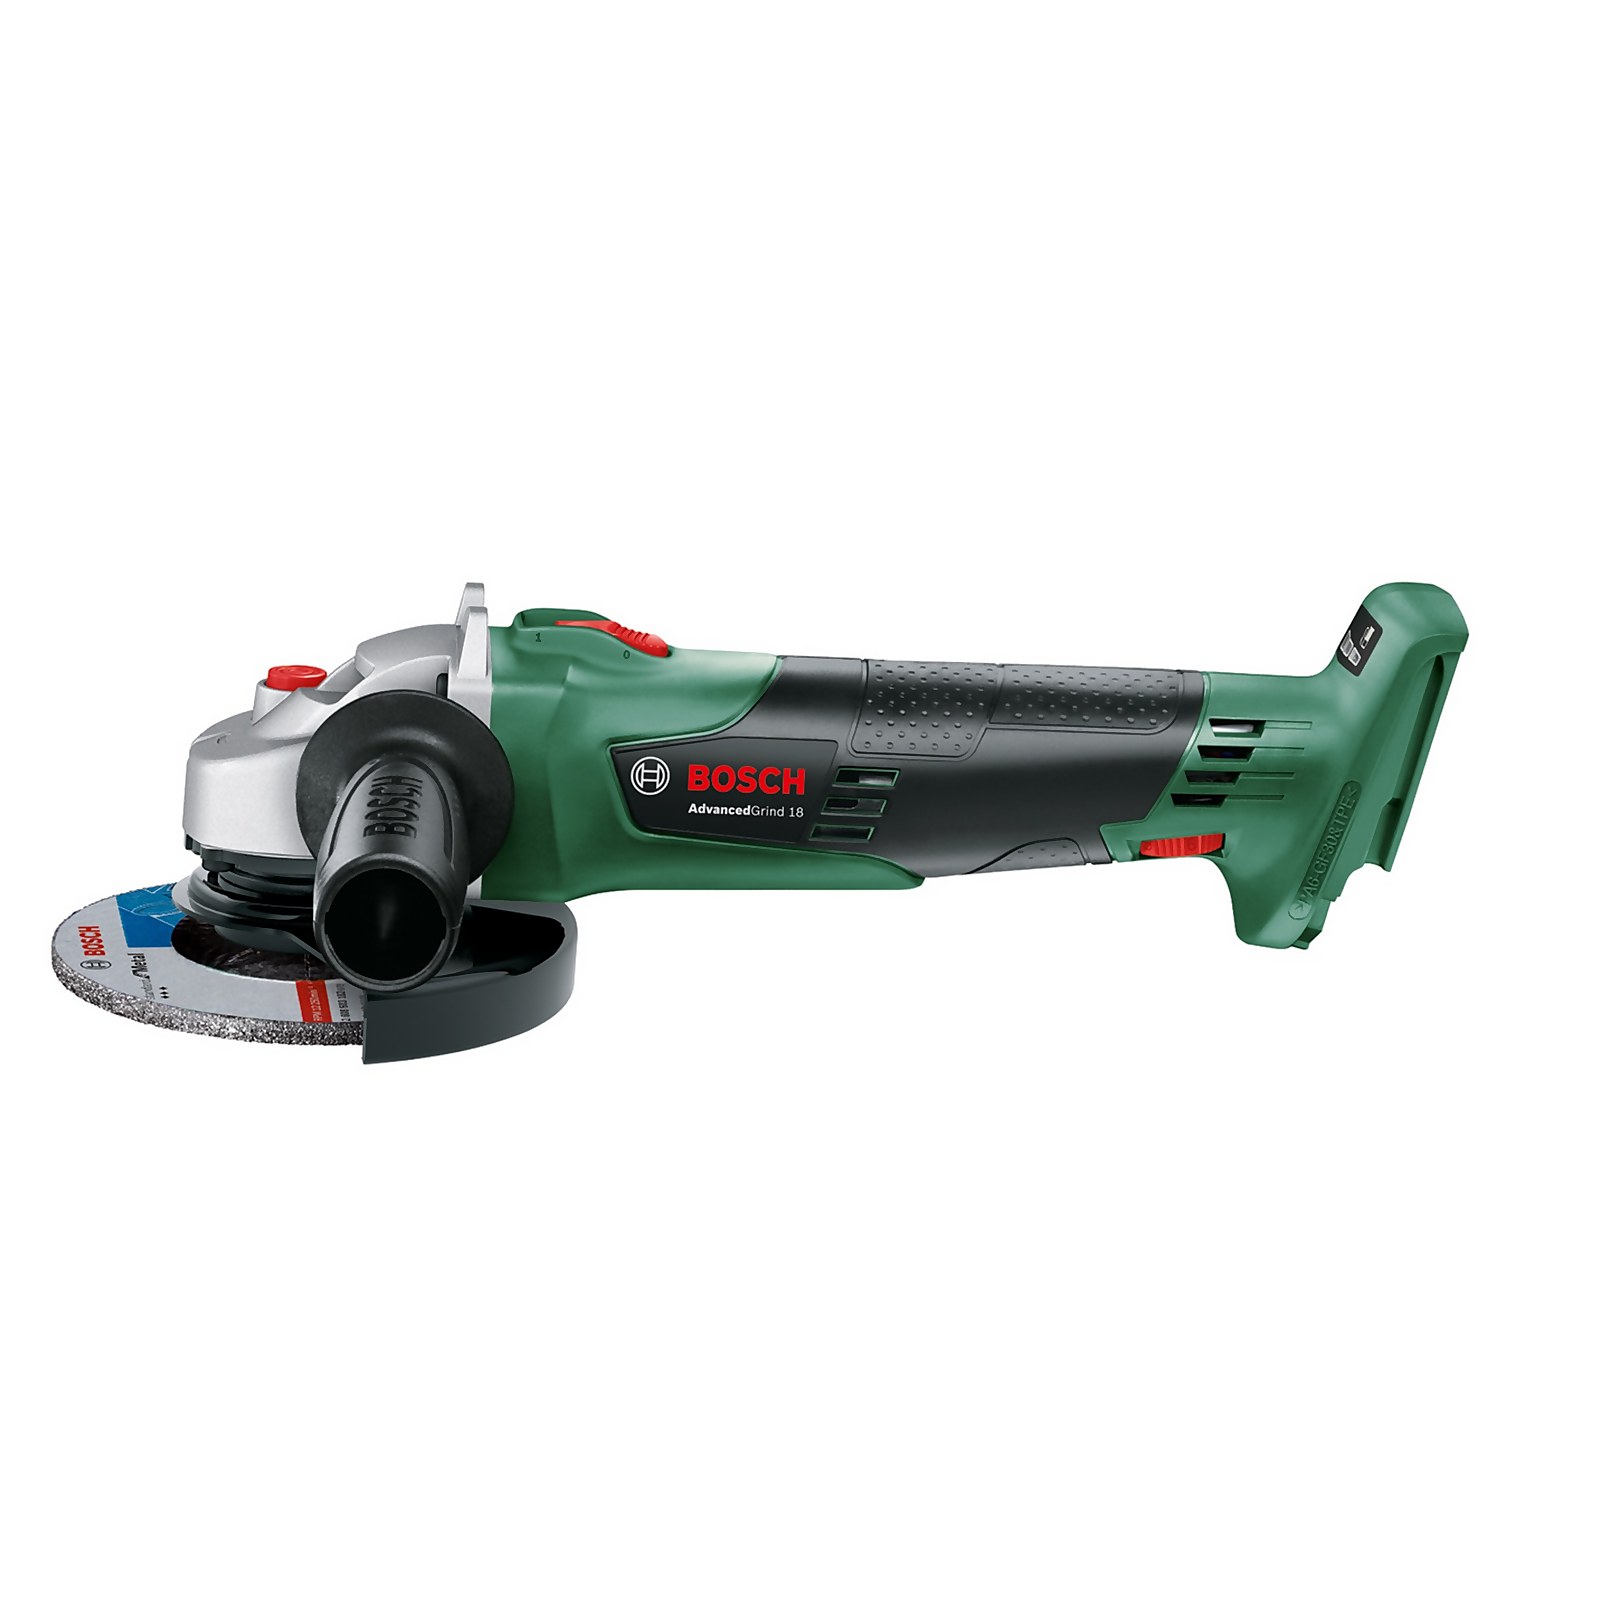 Photo of Bosch Advancedgrind 18 Angle Grinder -no Battery Included-